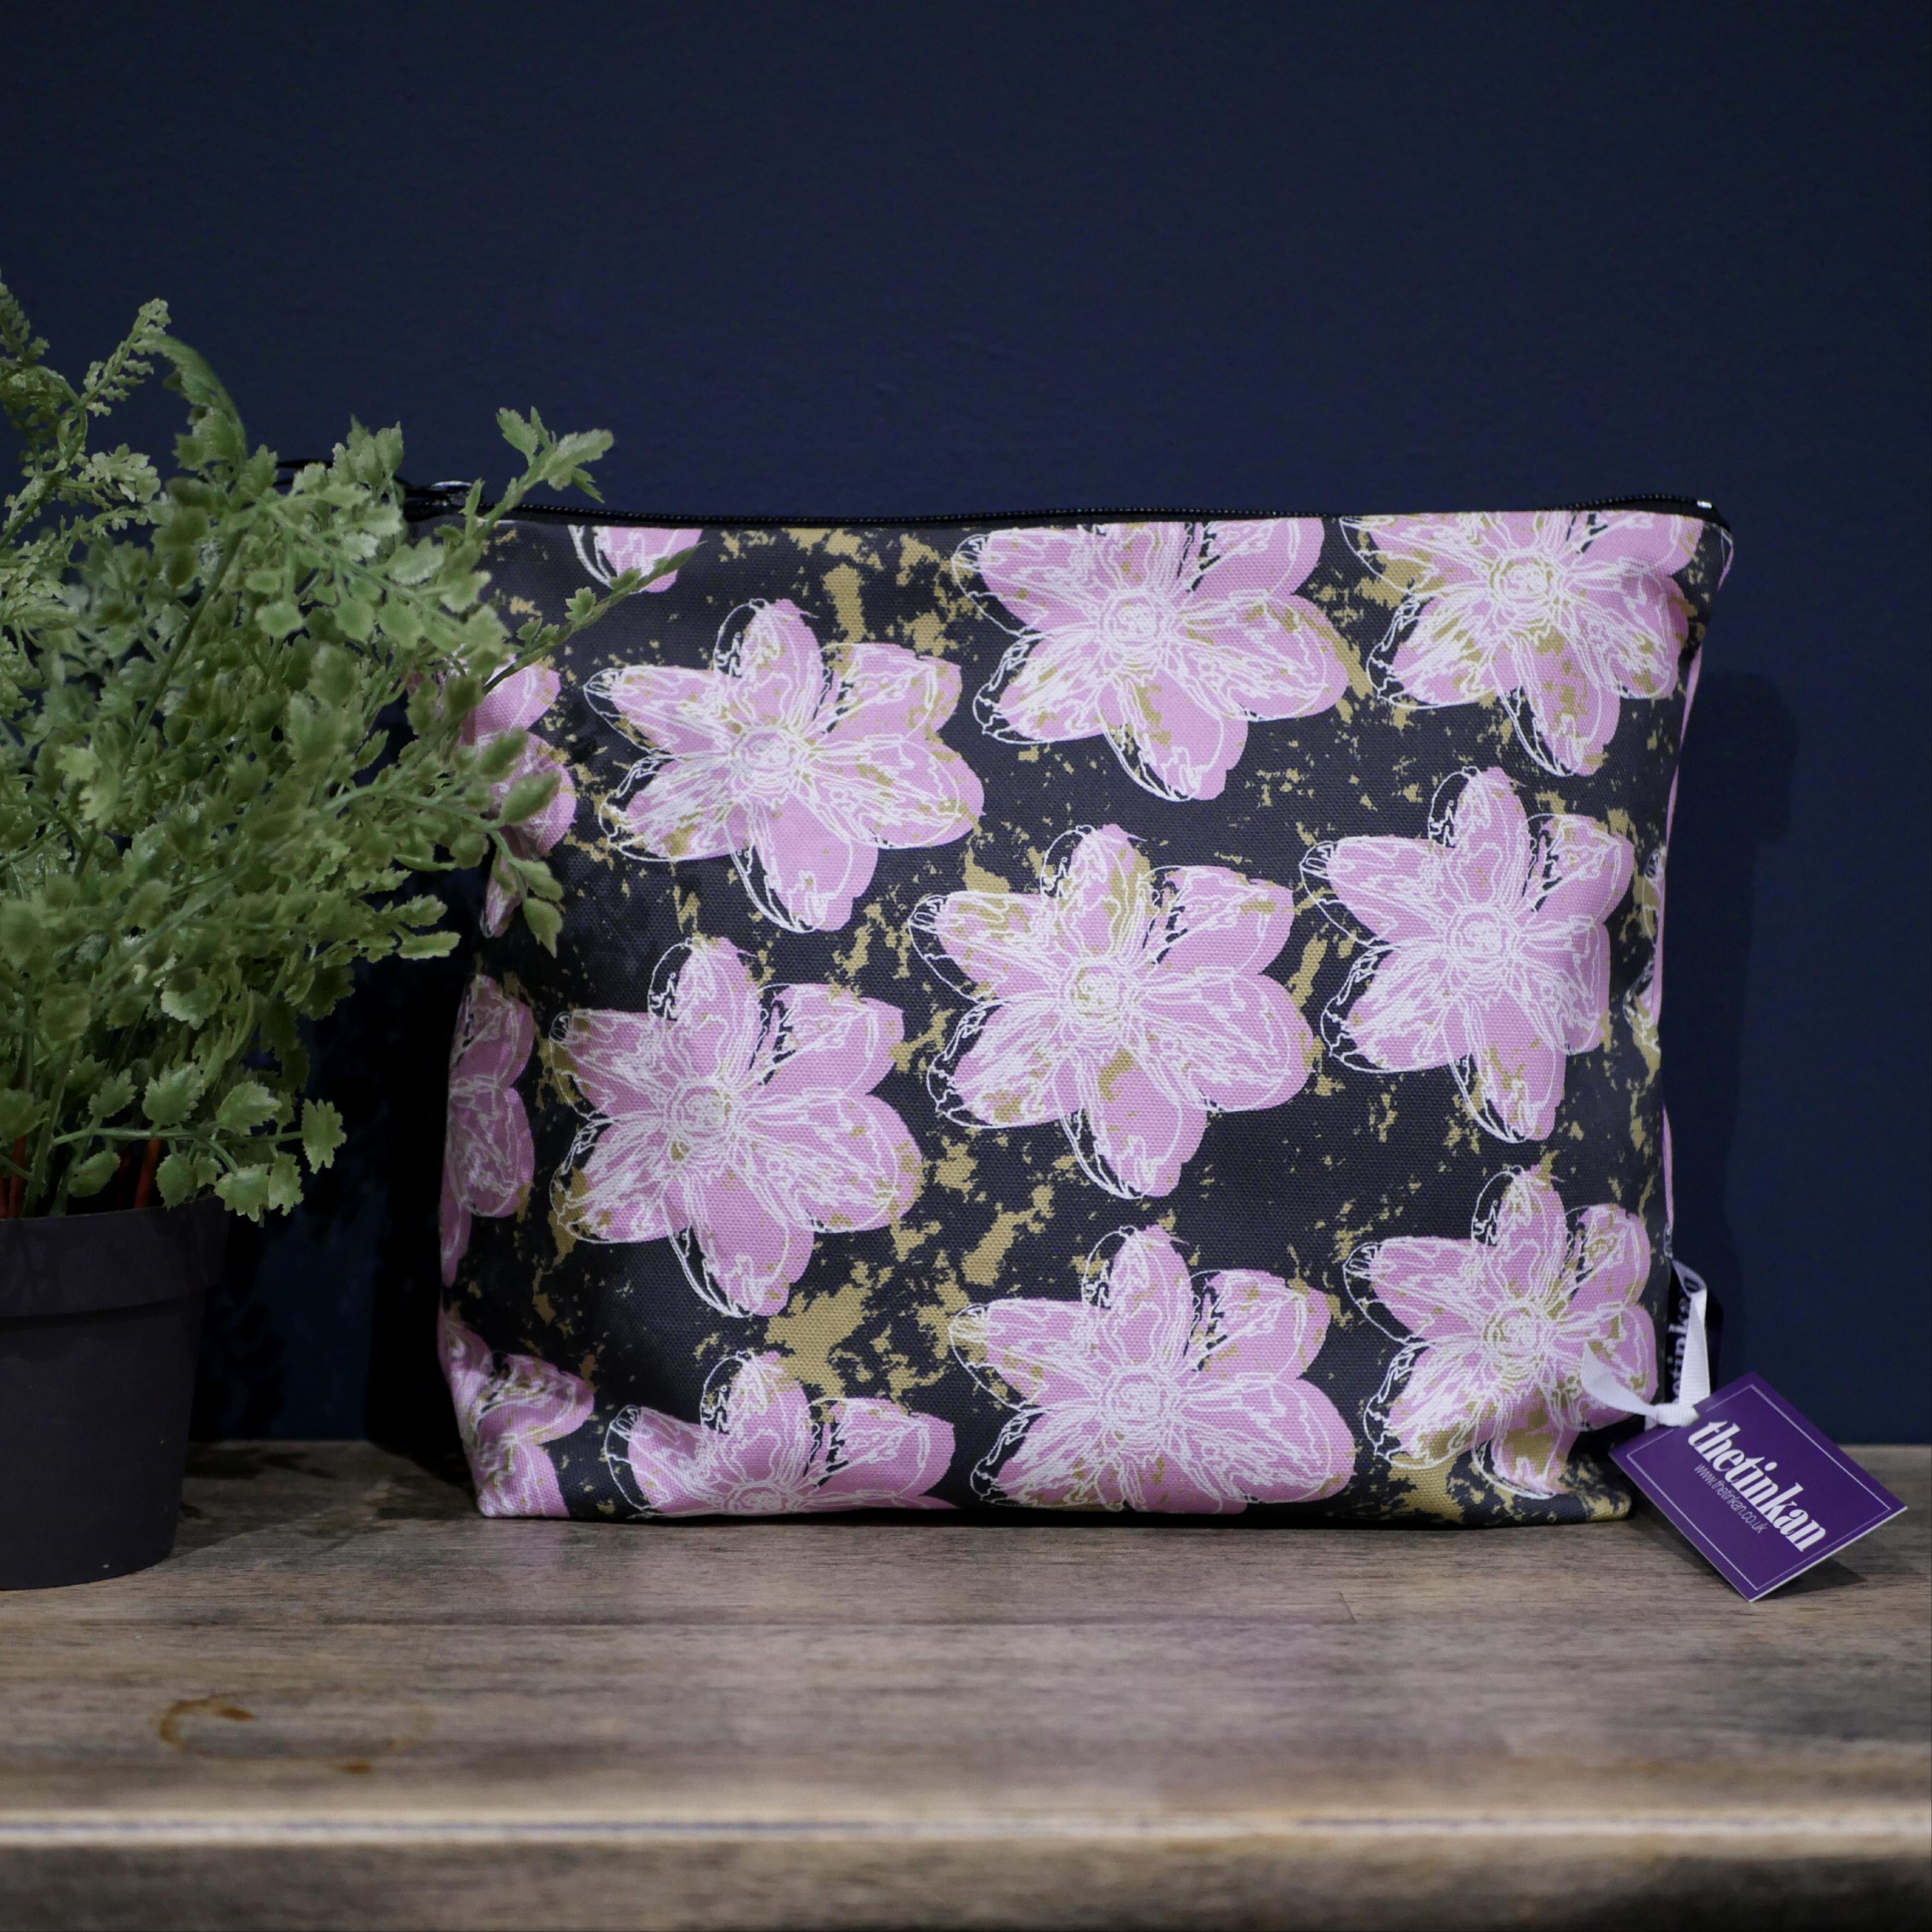 Candy pink flower with a matching coloured reverse, set on a dark charcoal grey background with an olive green colour splash. Designed by thetinkan, the flower splash travel beauty washbag featuring the white traced outline of a?narcissus flower is made from panama cotton with black waterproof lining and matching black sturdy zip. Generously sized for all your travel or home needs.? VIEW PRODUCT >>